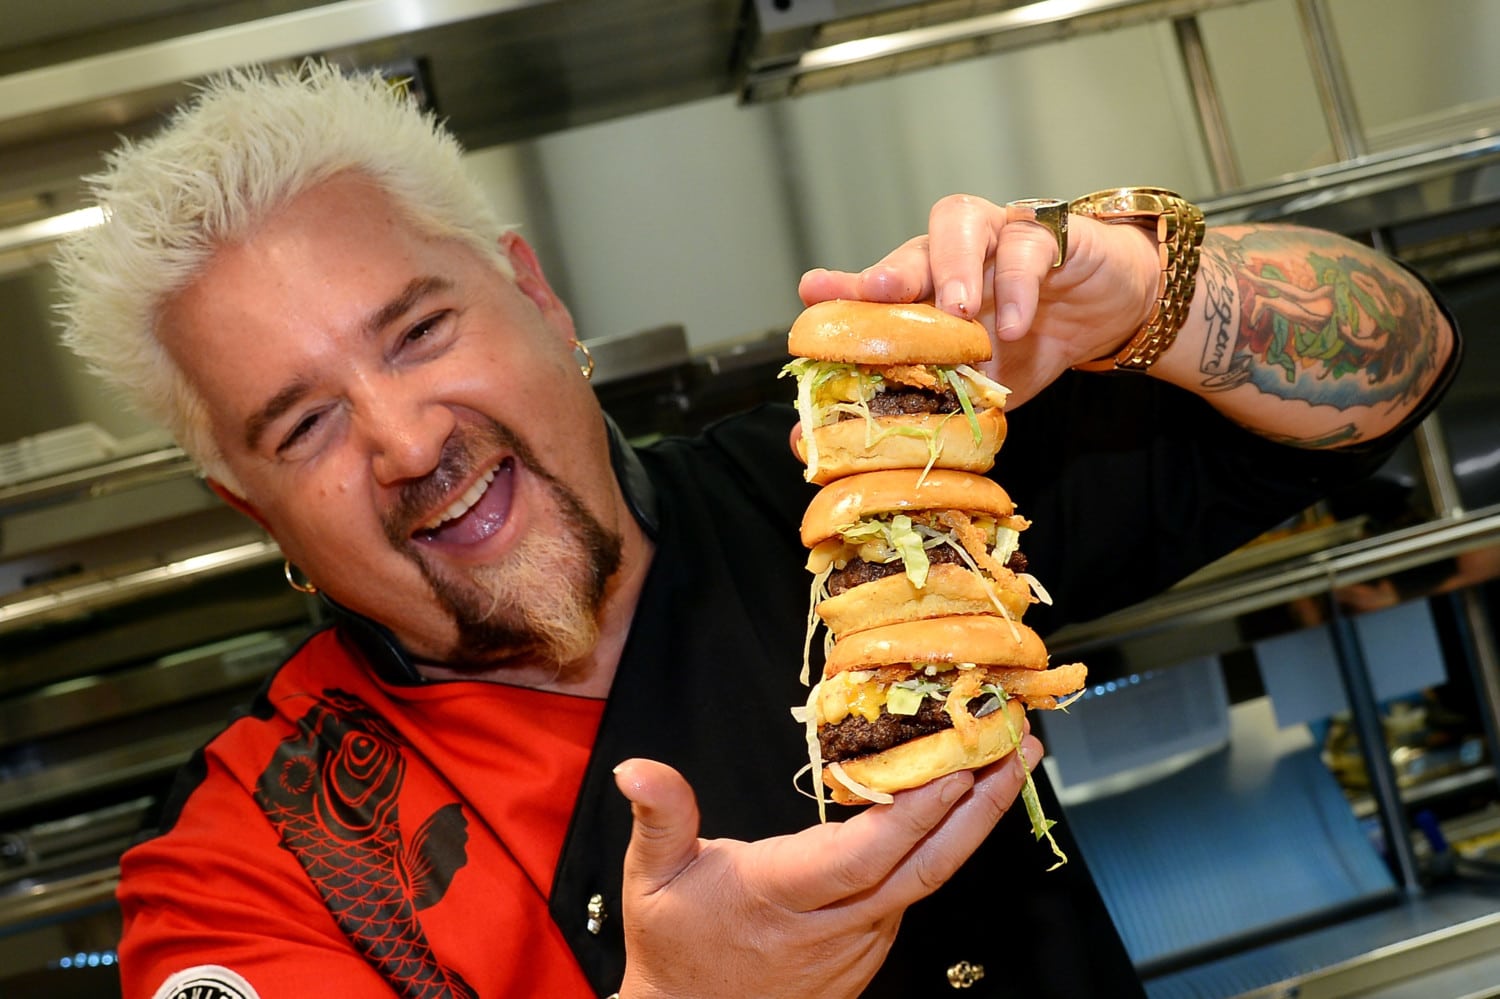 Guy Fieri was born under the legal name Guy Ramsay Ferry